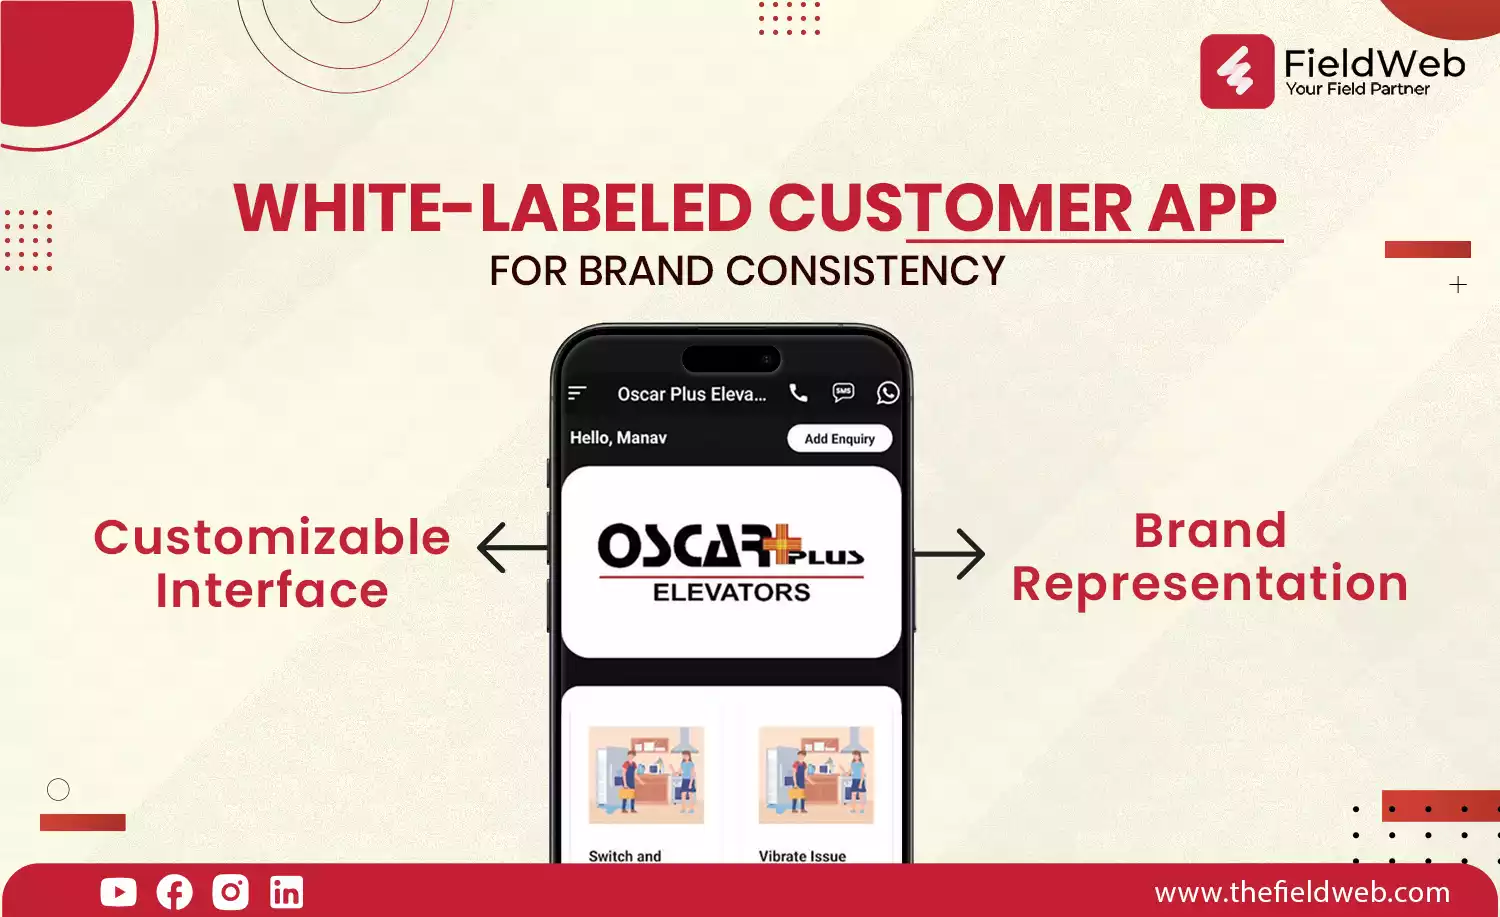 image is displaying White-Labeled Customer App for Brand